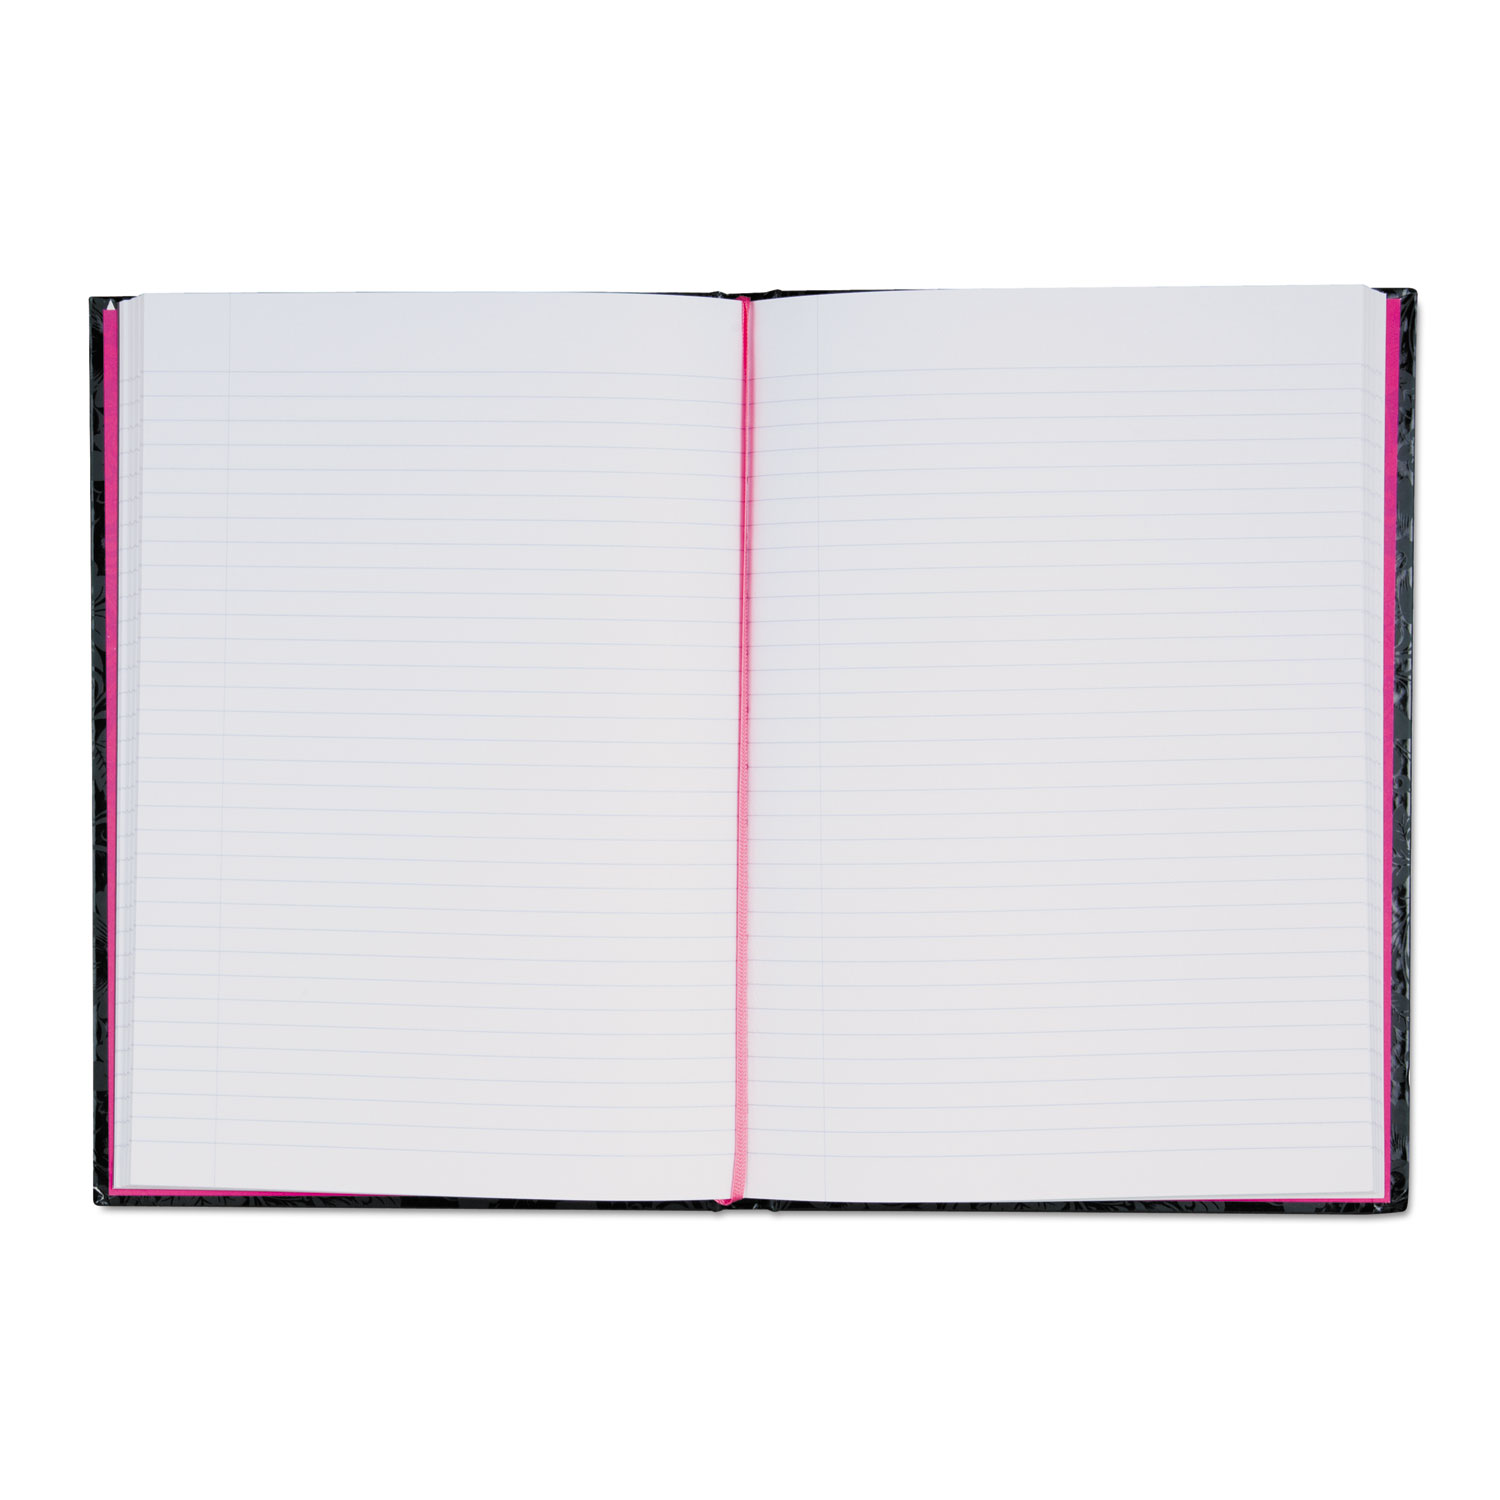 Notebook, Medium/College Rule, Black/Pink/Floral Cover, 11.68 x 8.25, 96 Pages